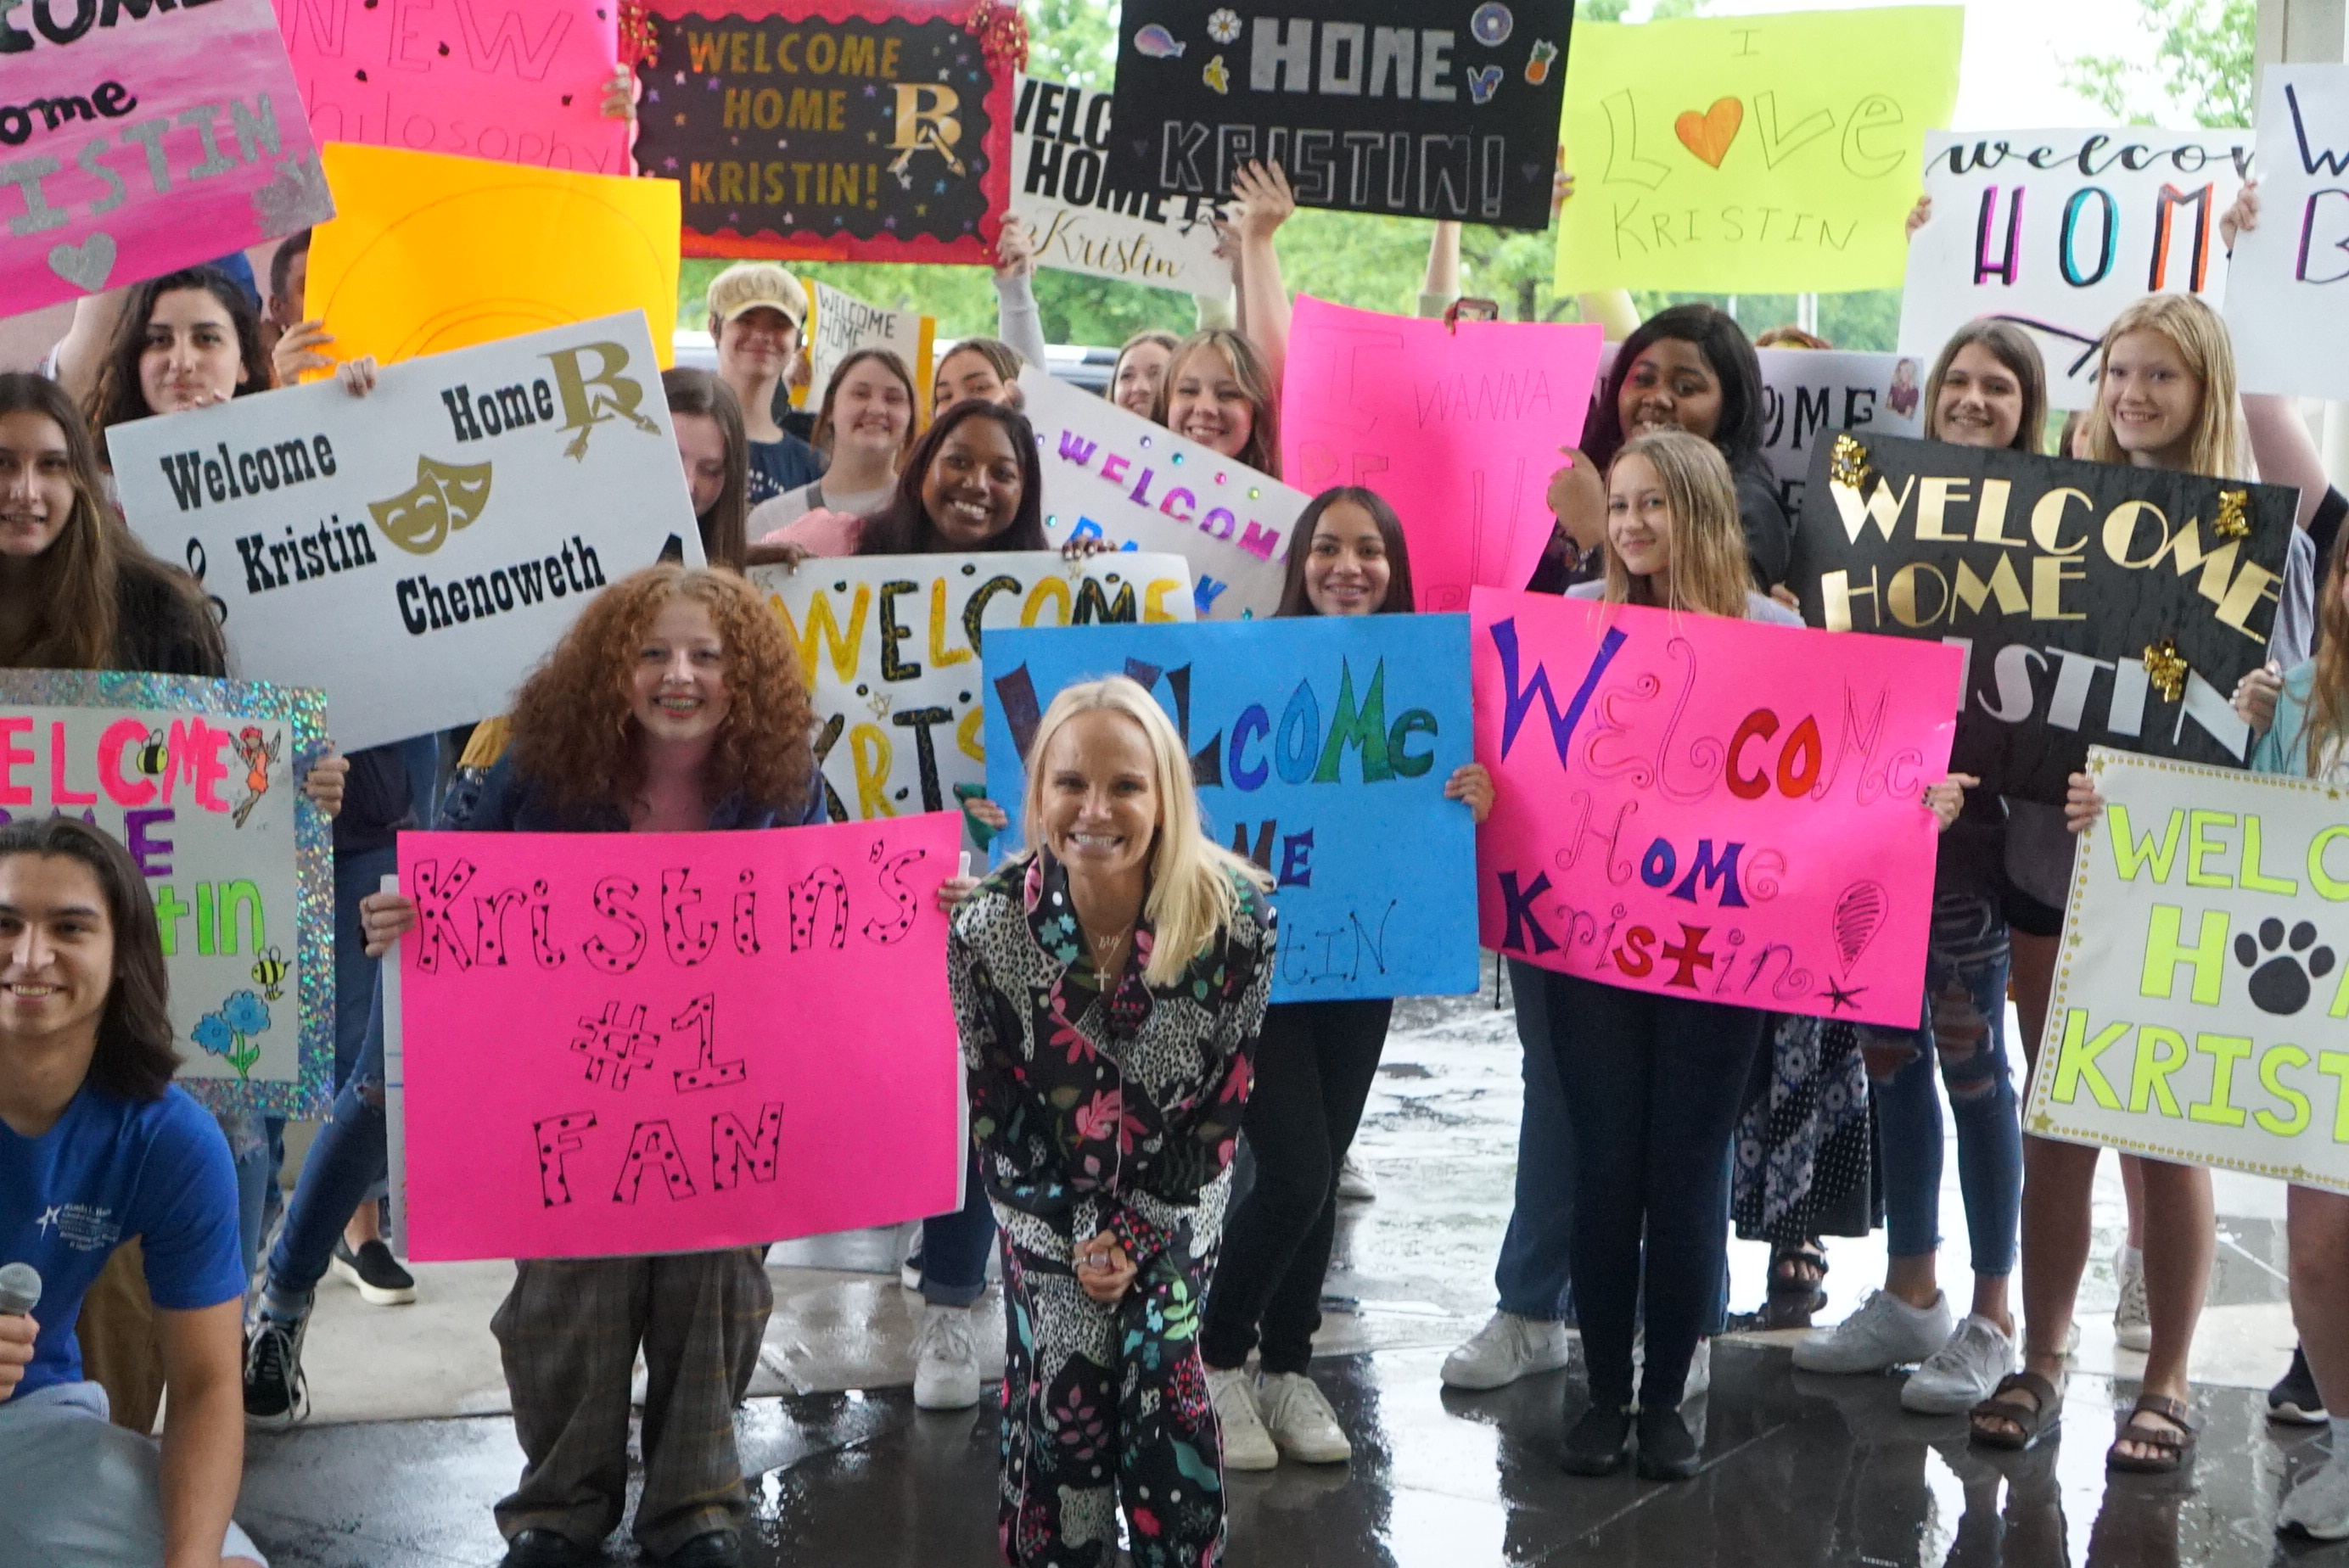 Good Morning Campers! Kristin Chenoweth greets fans after starring on the KCBBC Morning Show. Photo Credit: Merrill Mitchell